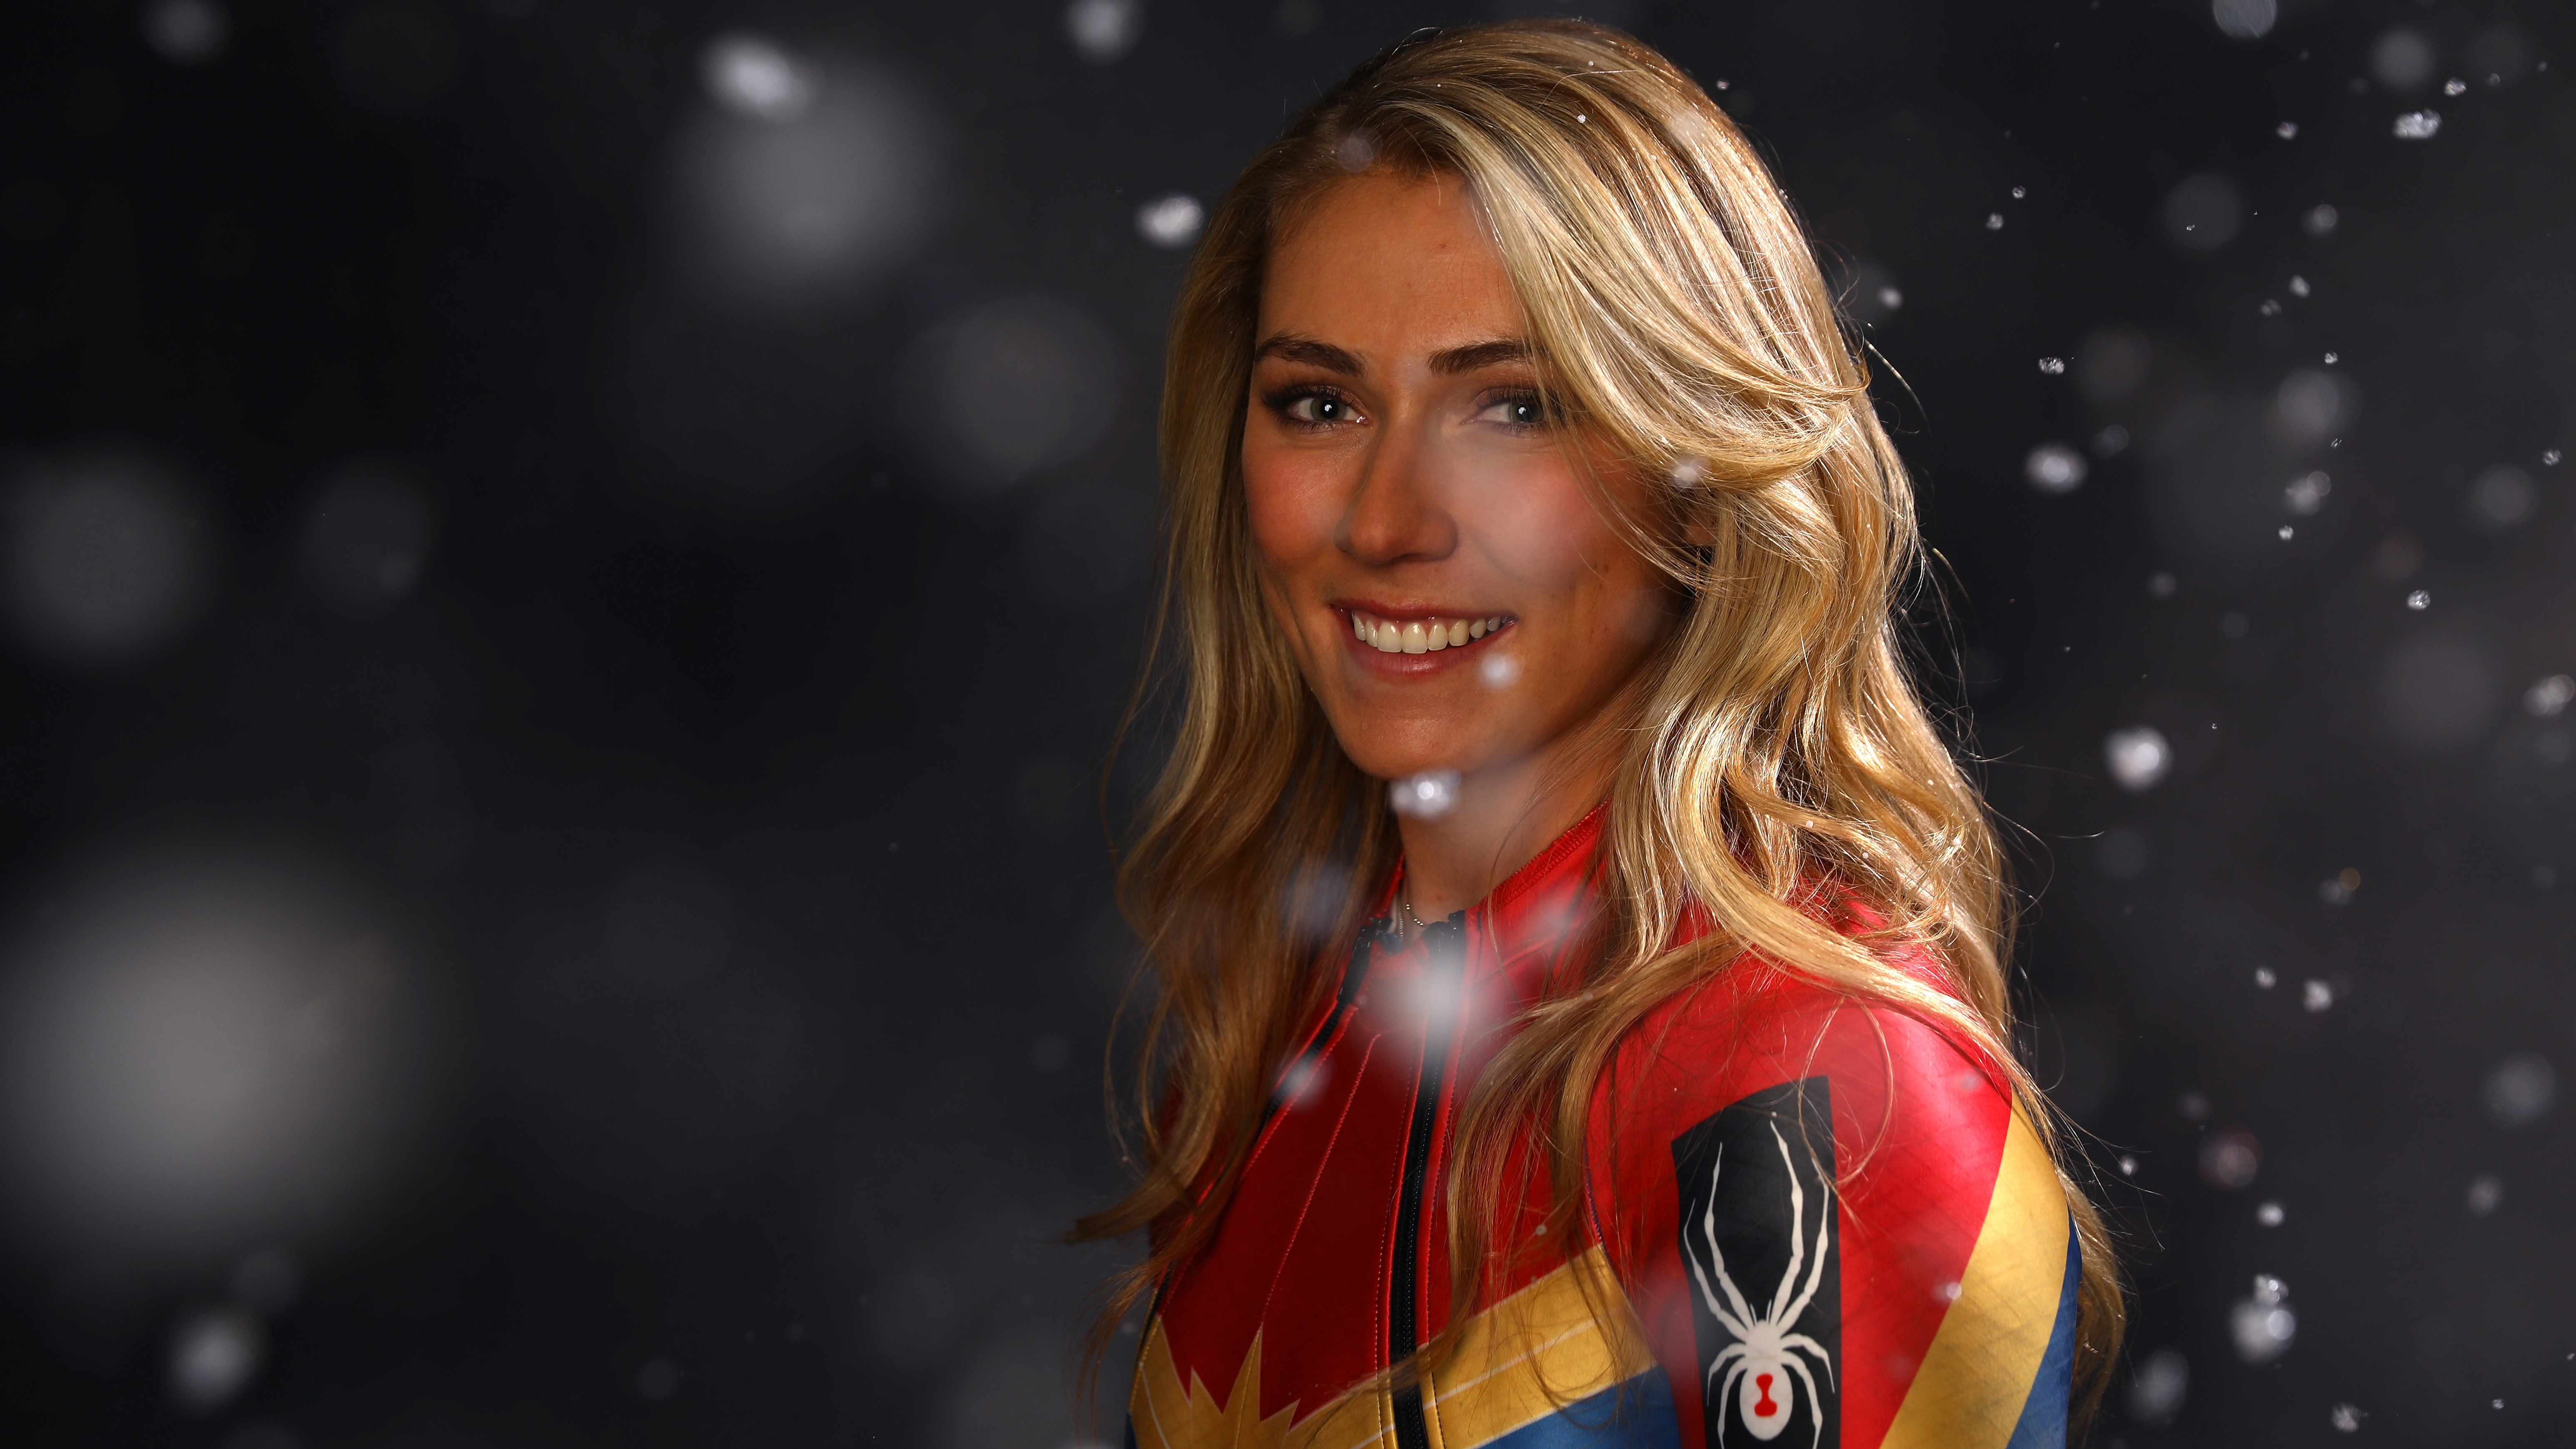 king5.com | U.S. skier Mikaela Shiffrin won't apologize for dreaming big about ...6180 x 3476